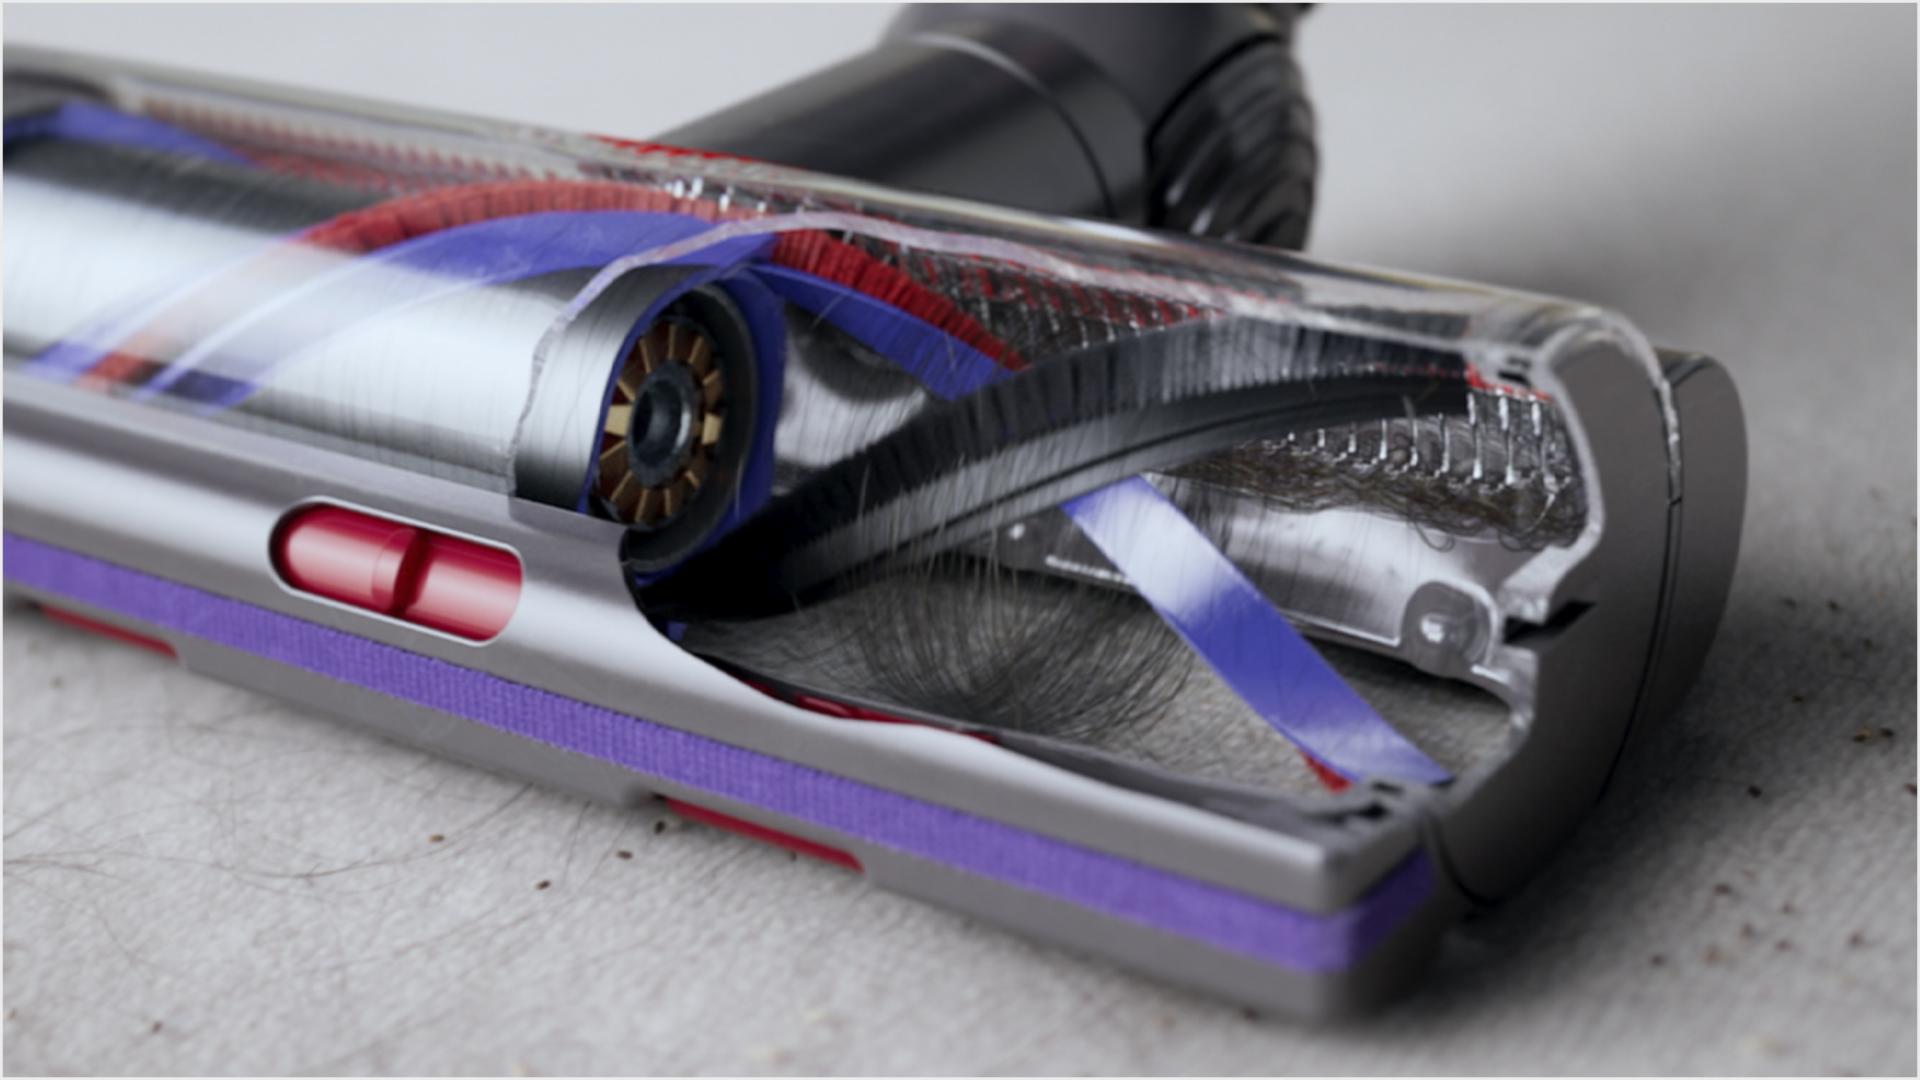 Cutaway shows Dyson Motorbar cleaner head technology in action